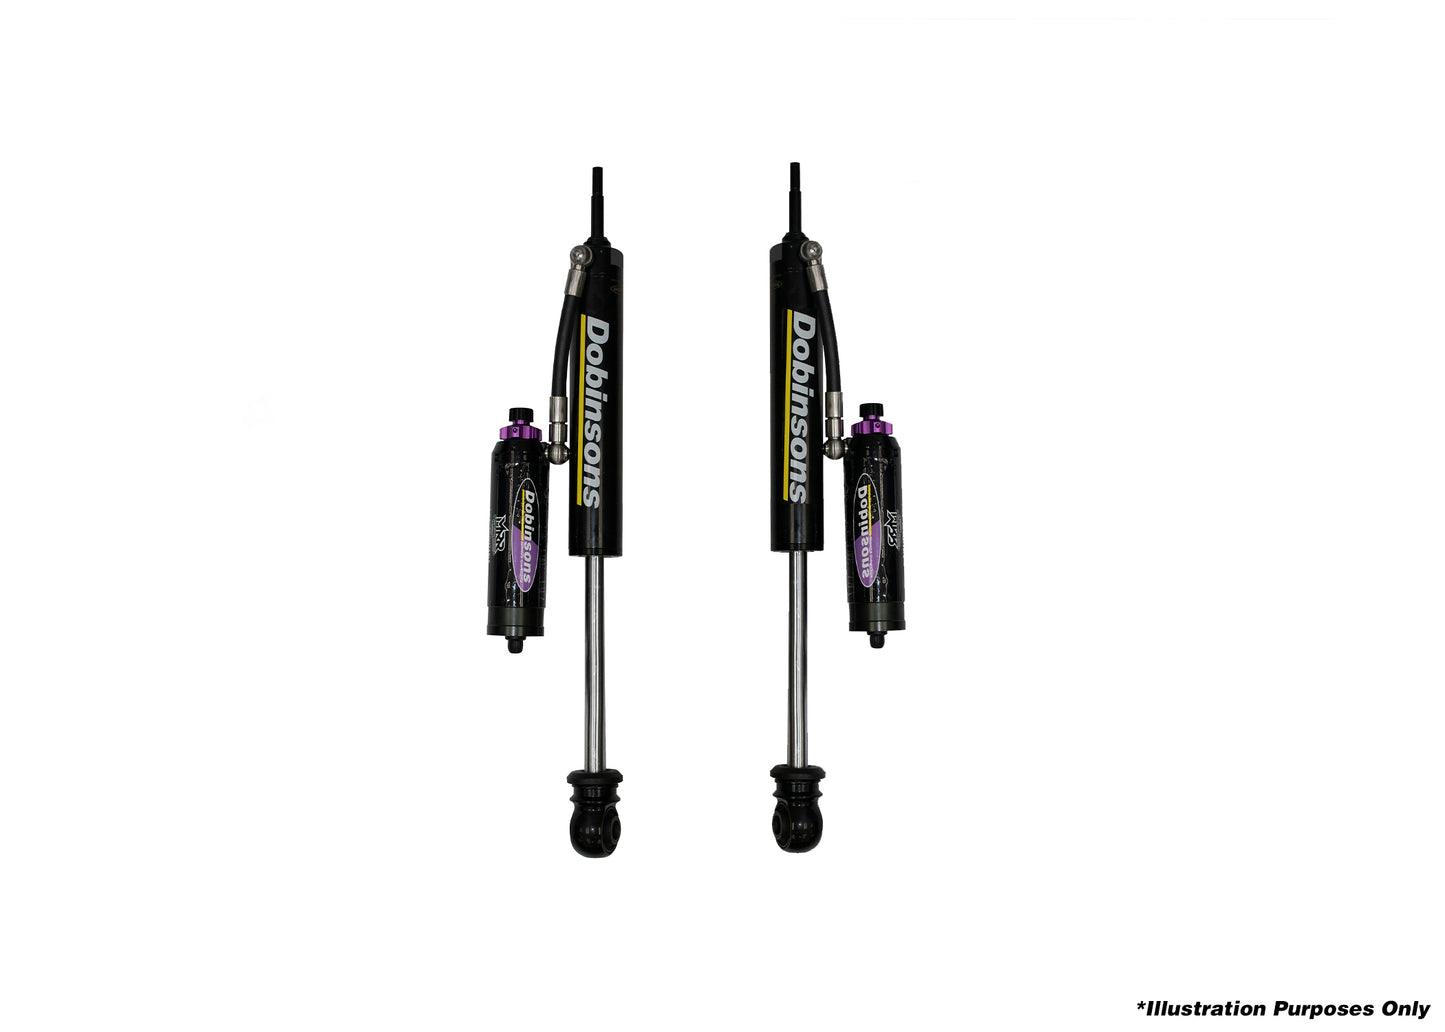 Dobinsons MRR 3-way Adjustable Rear Shocks for NISSAN NAVARA/ FRONTIER D40 2006-2021 and X-TERRA 2005-ON (MRA45-A645) - MRA45-A645